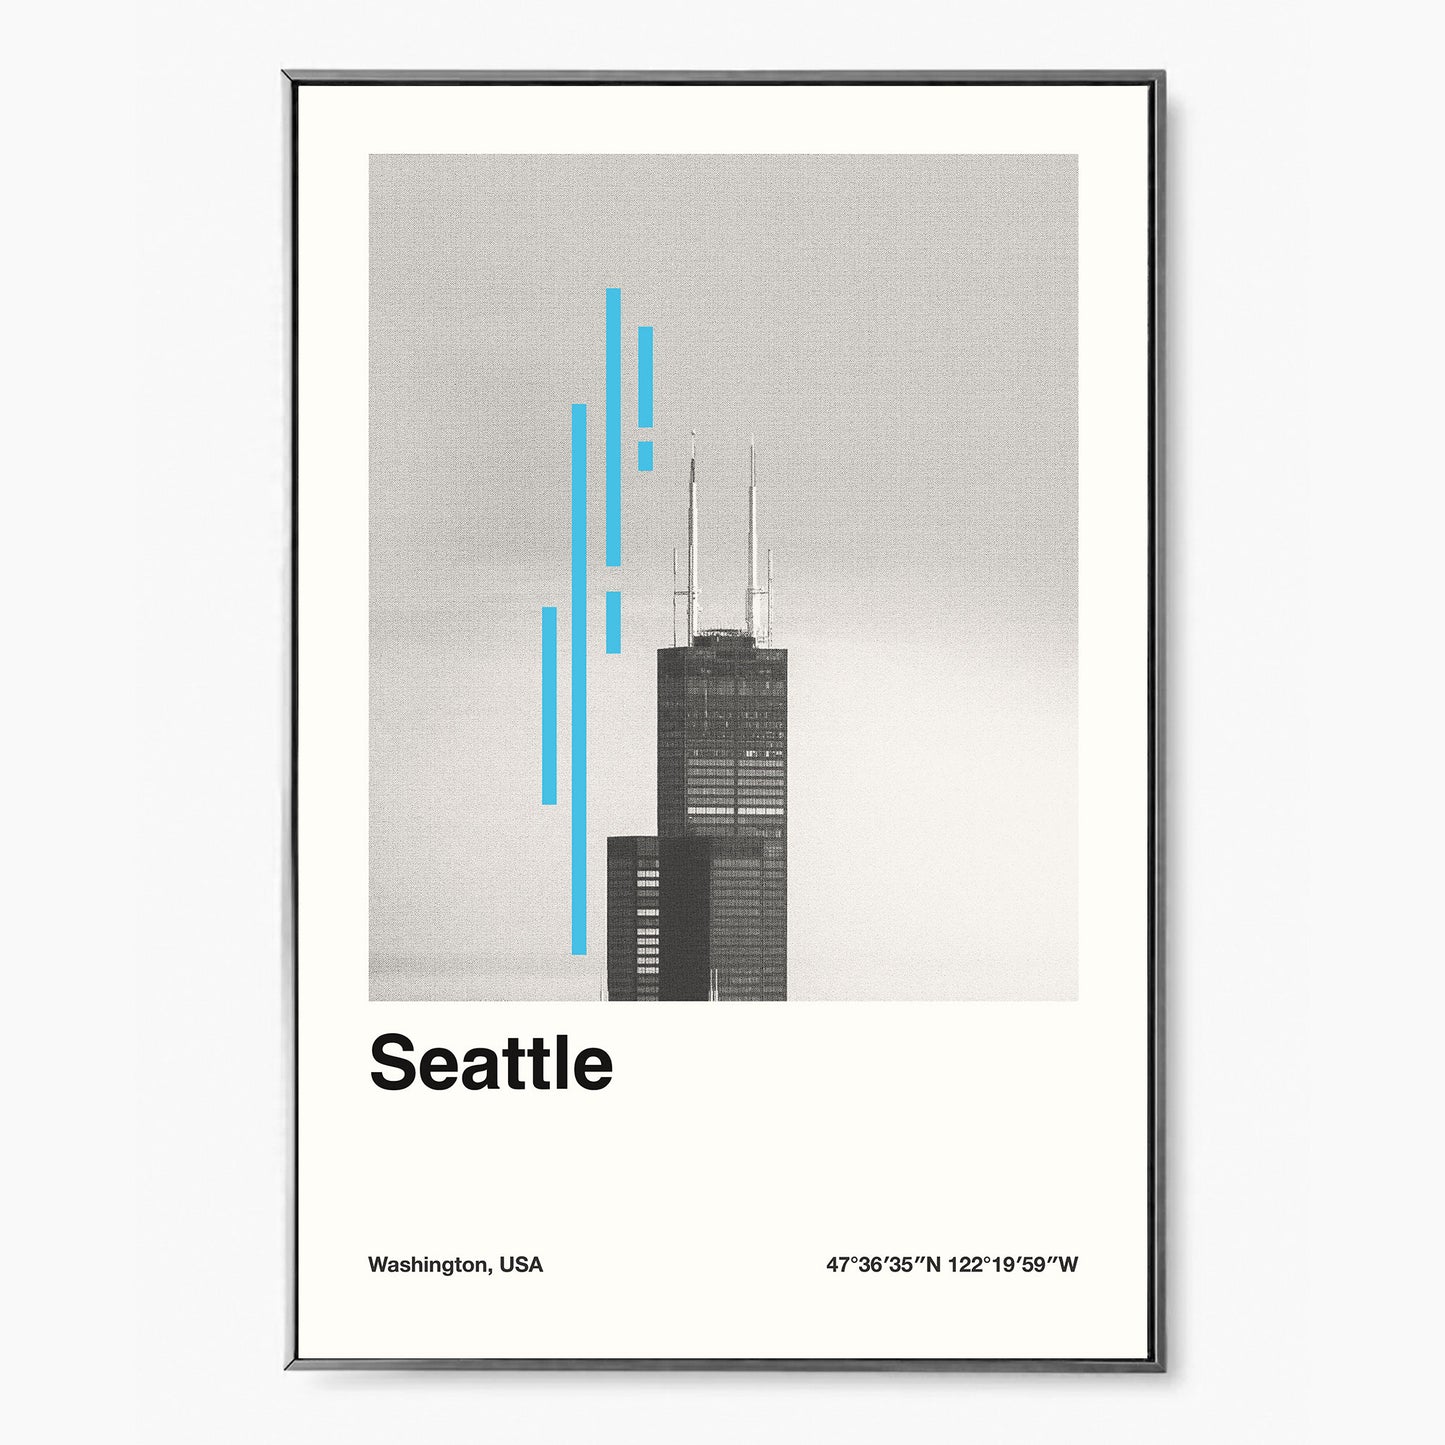 A thewallflowerclub poster with the word Seattle on it.